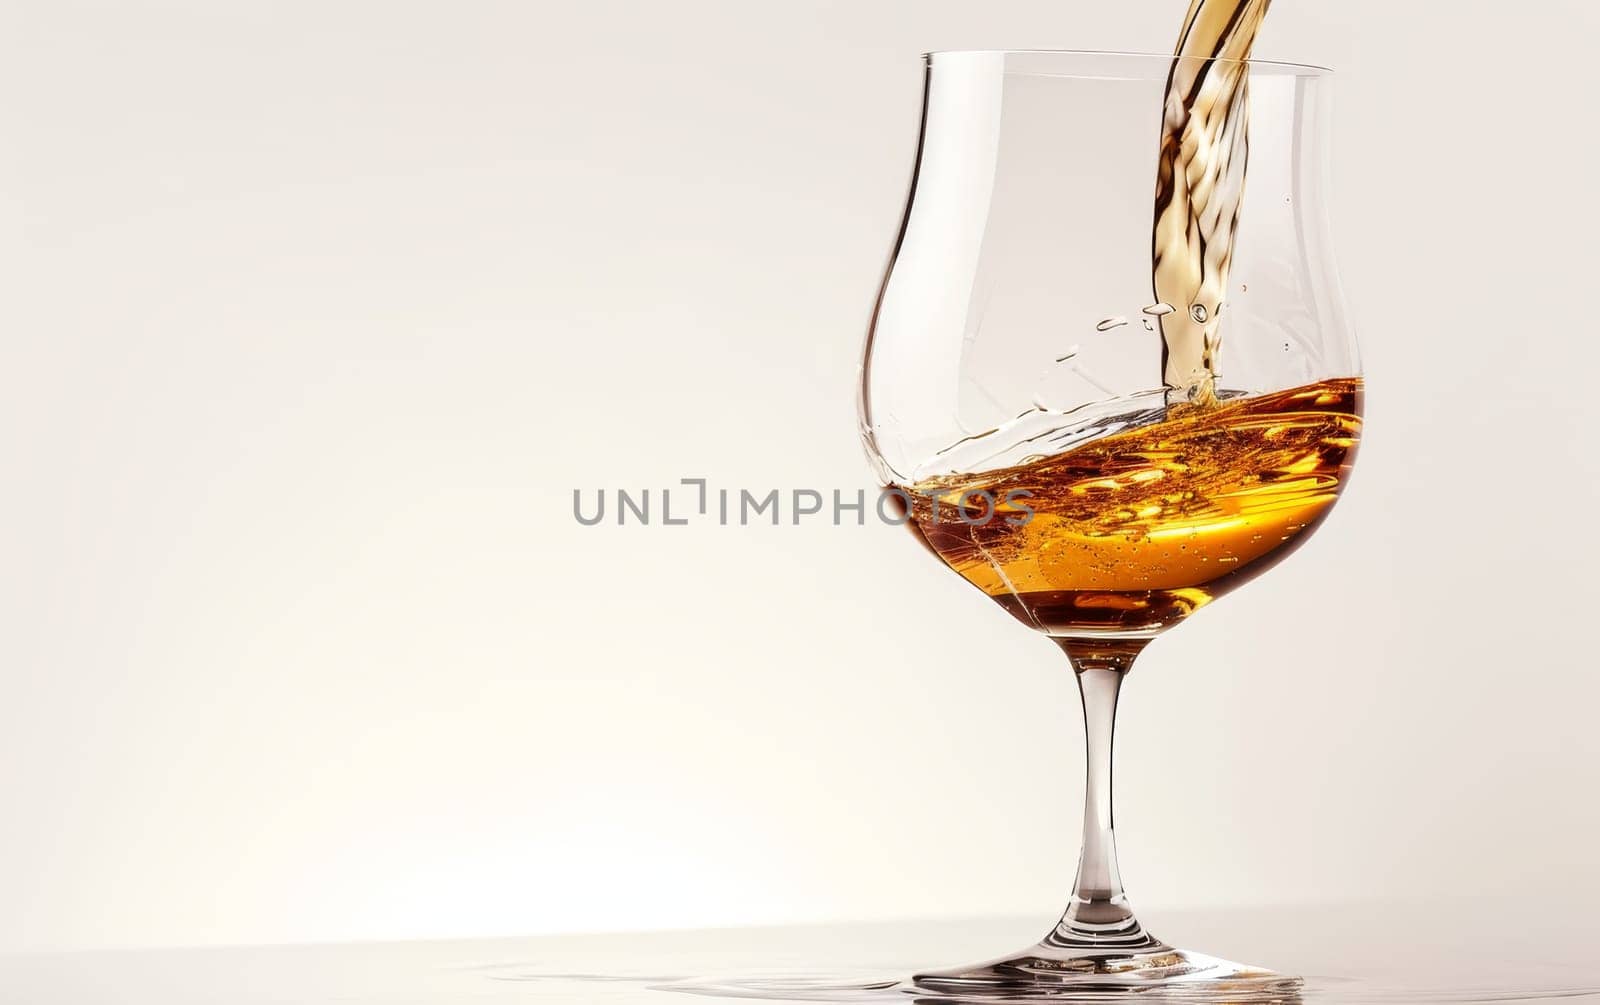 Golden alcohol liquid elegantly pouring into a wine glass against a soft, light background